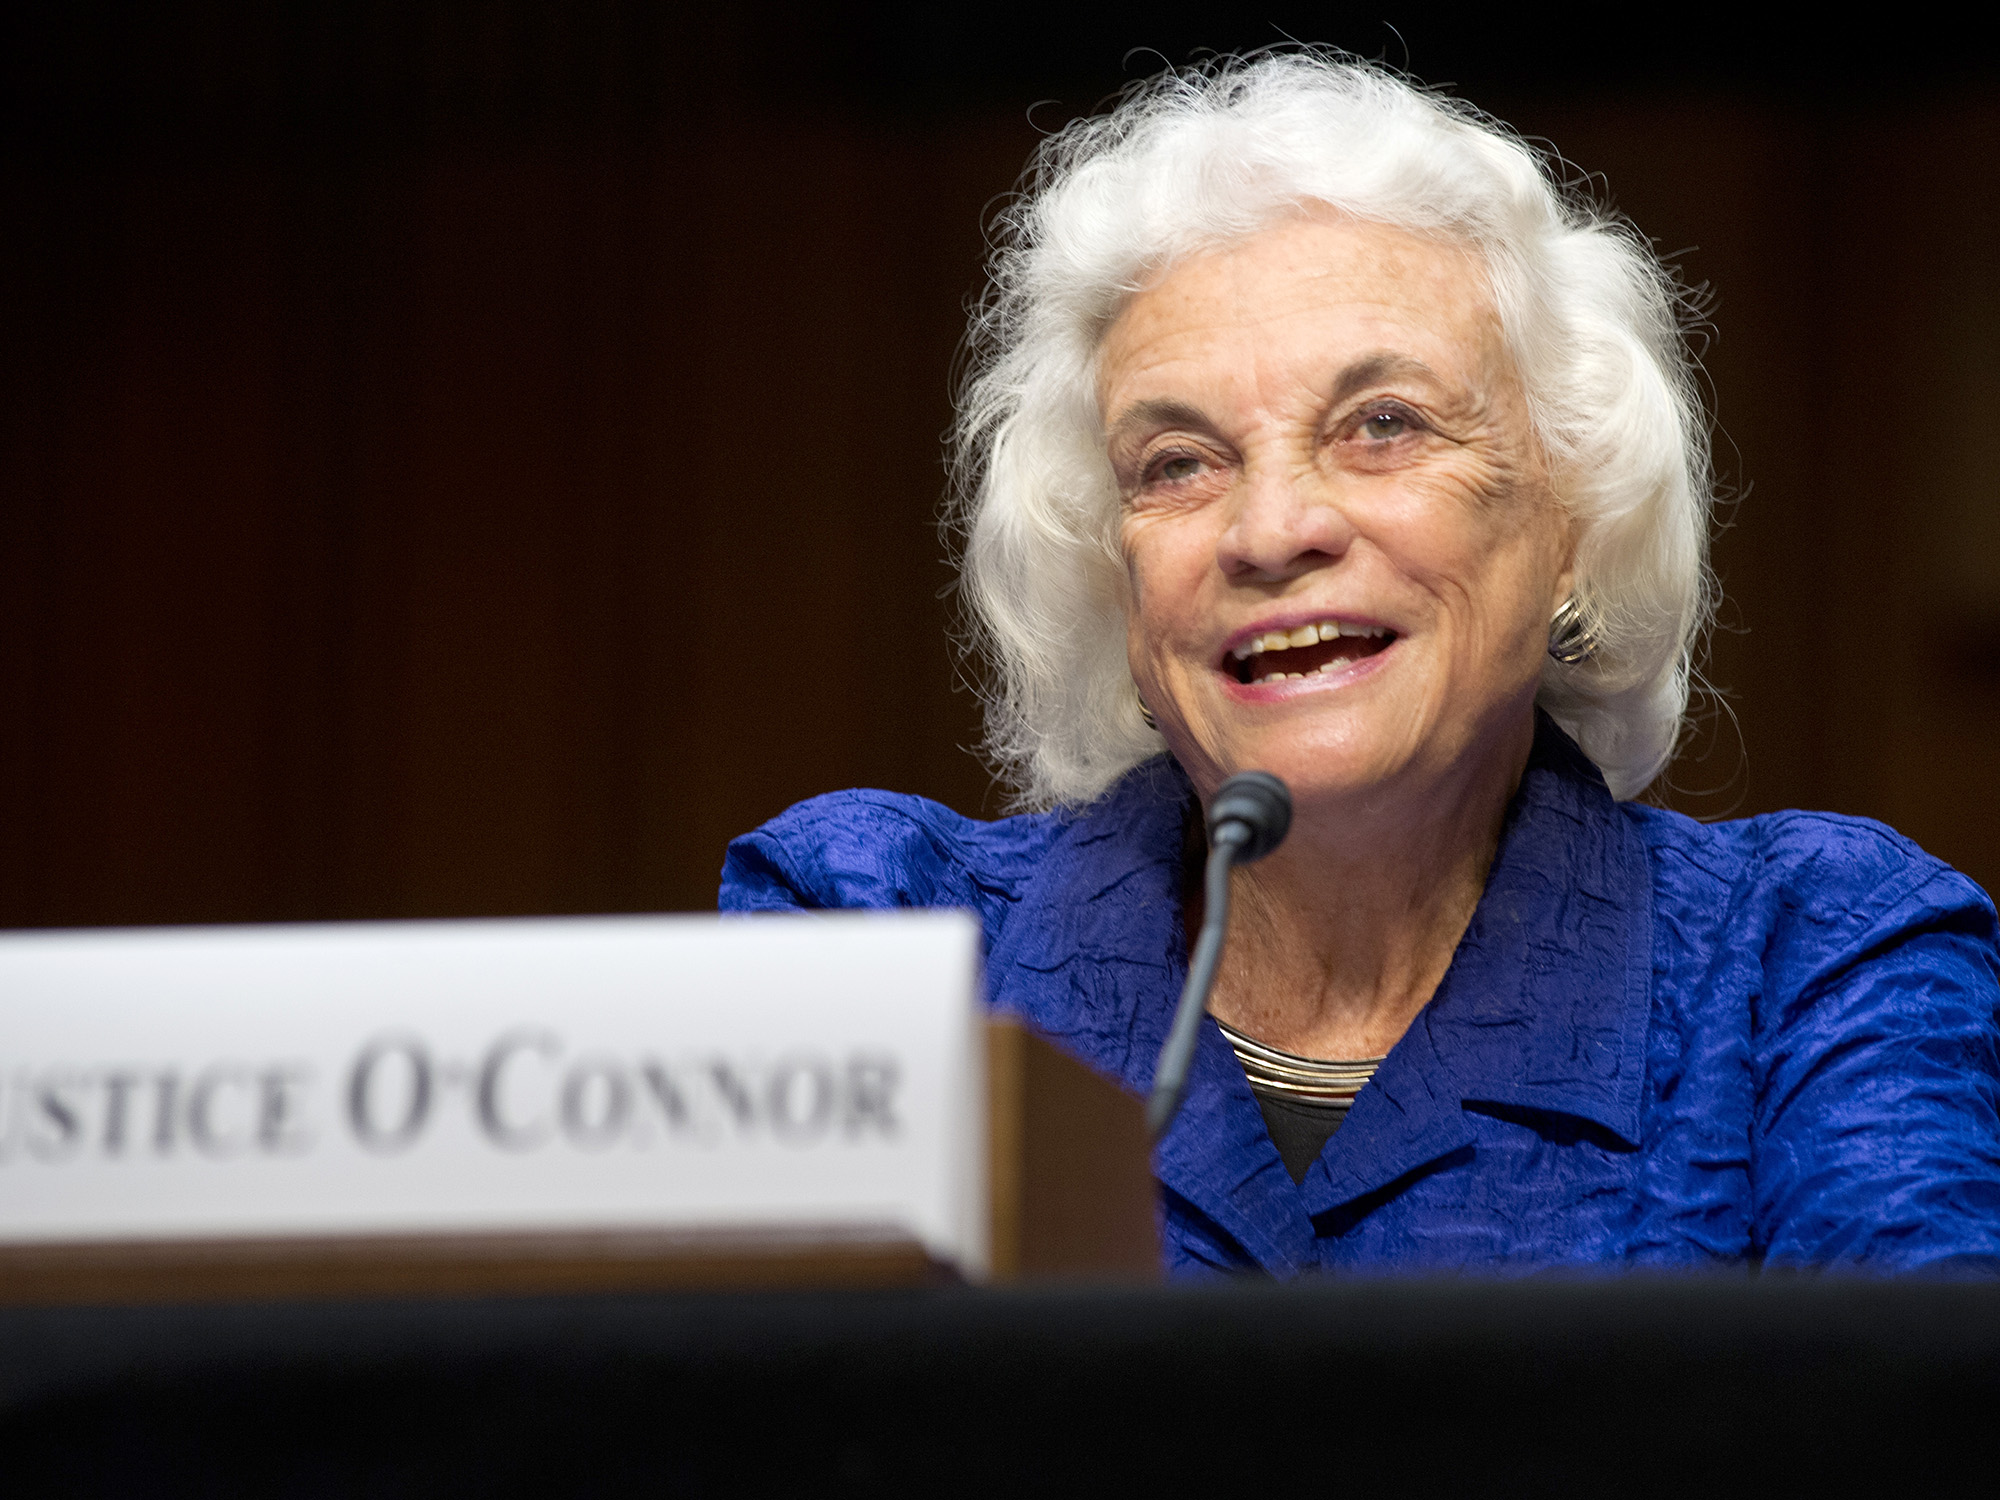 Retired Justice Sandra Day OConnor Says She Has Dementia pic